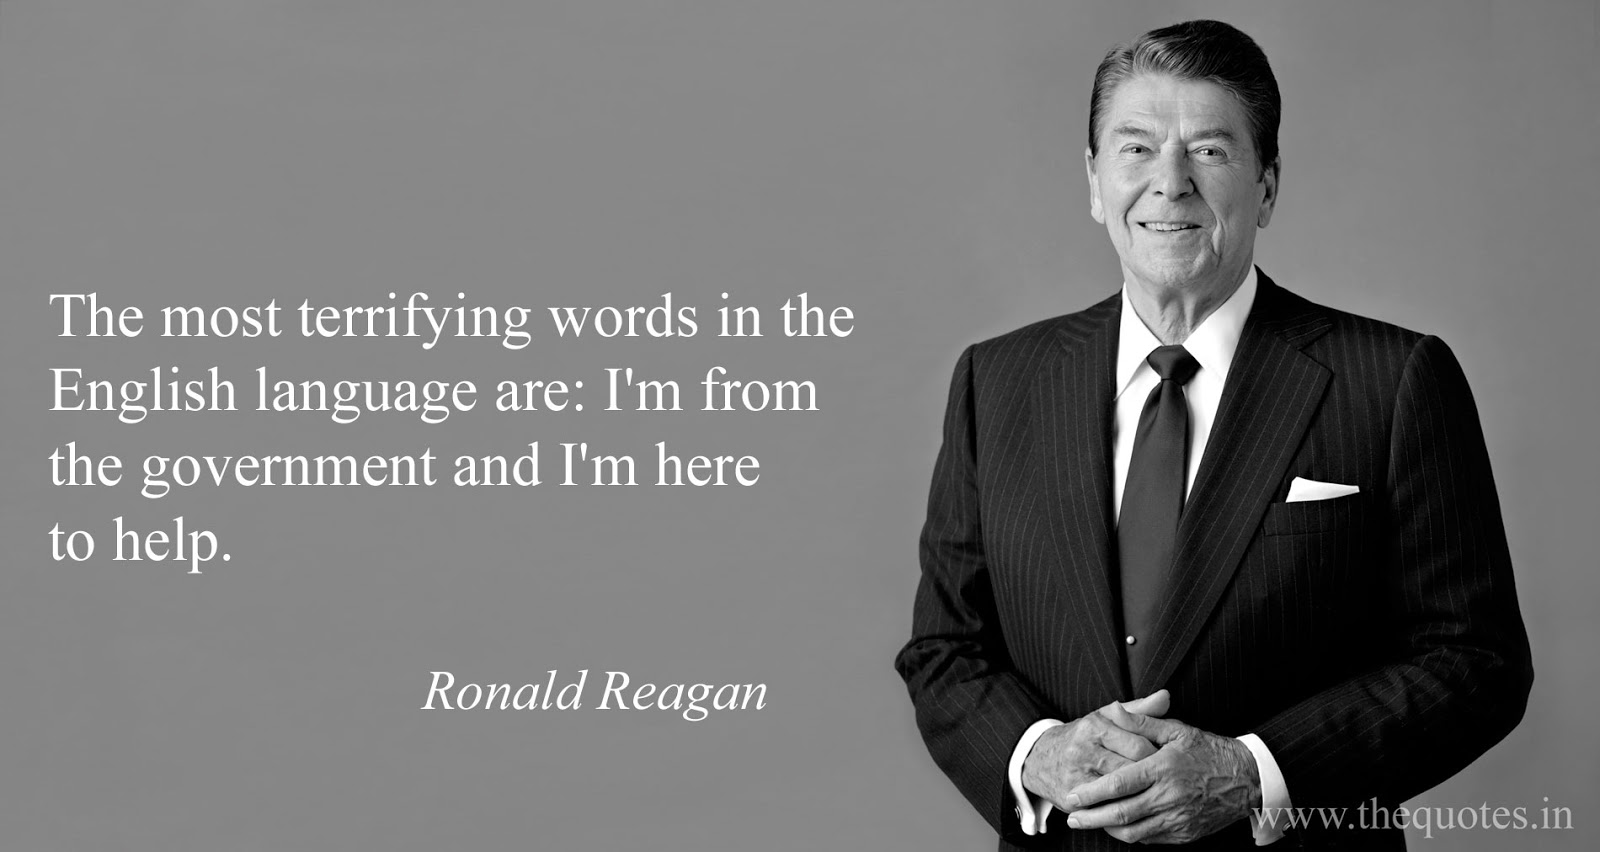 Ronald-Reagan--Im-from-the-government-and-im-here-to-help-Quotes-1.jpg